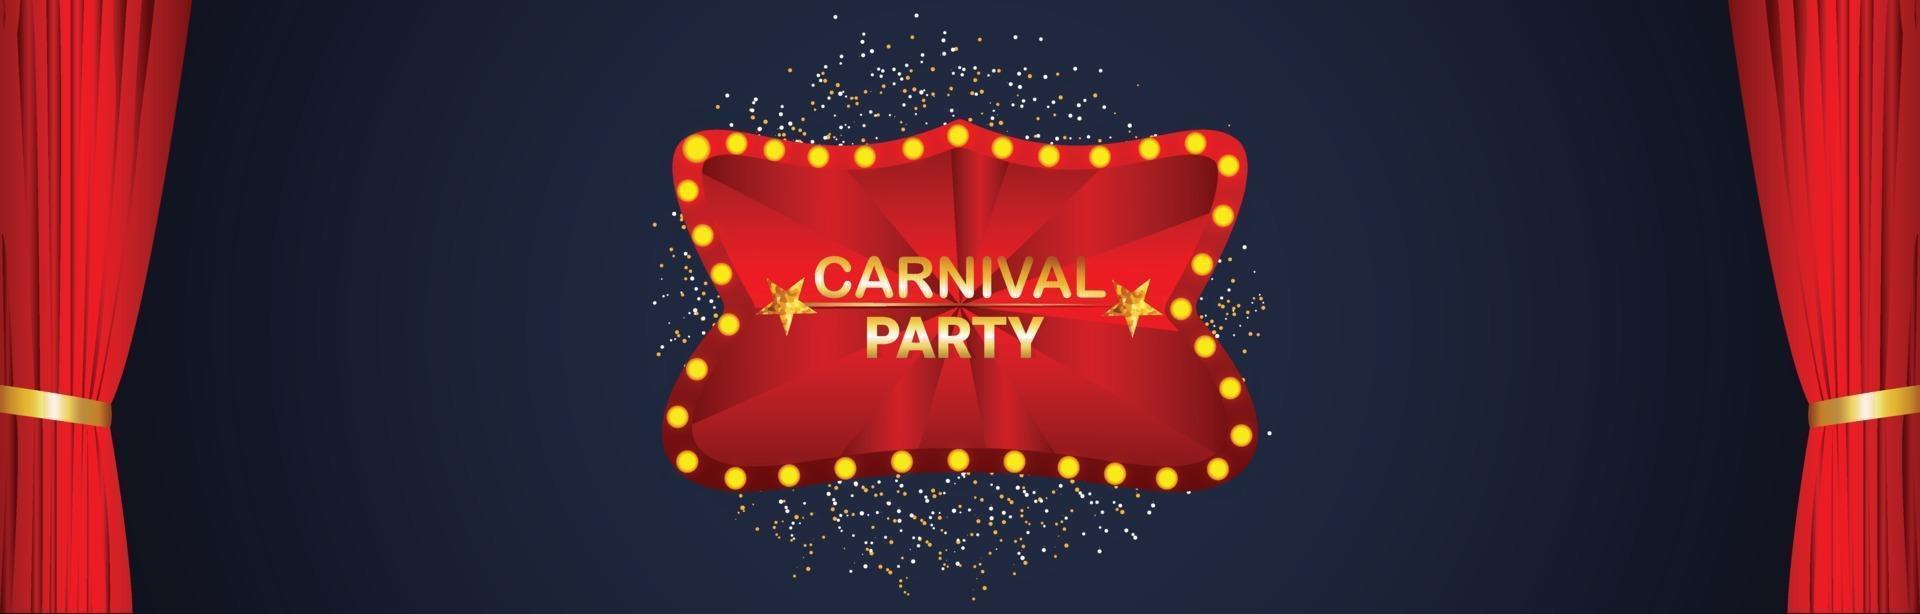 Carnival party invitation card with circus tent house vector